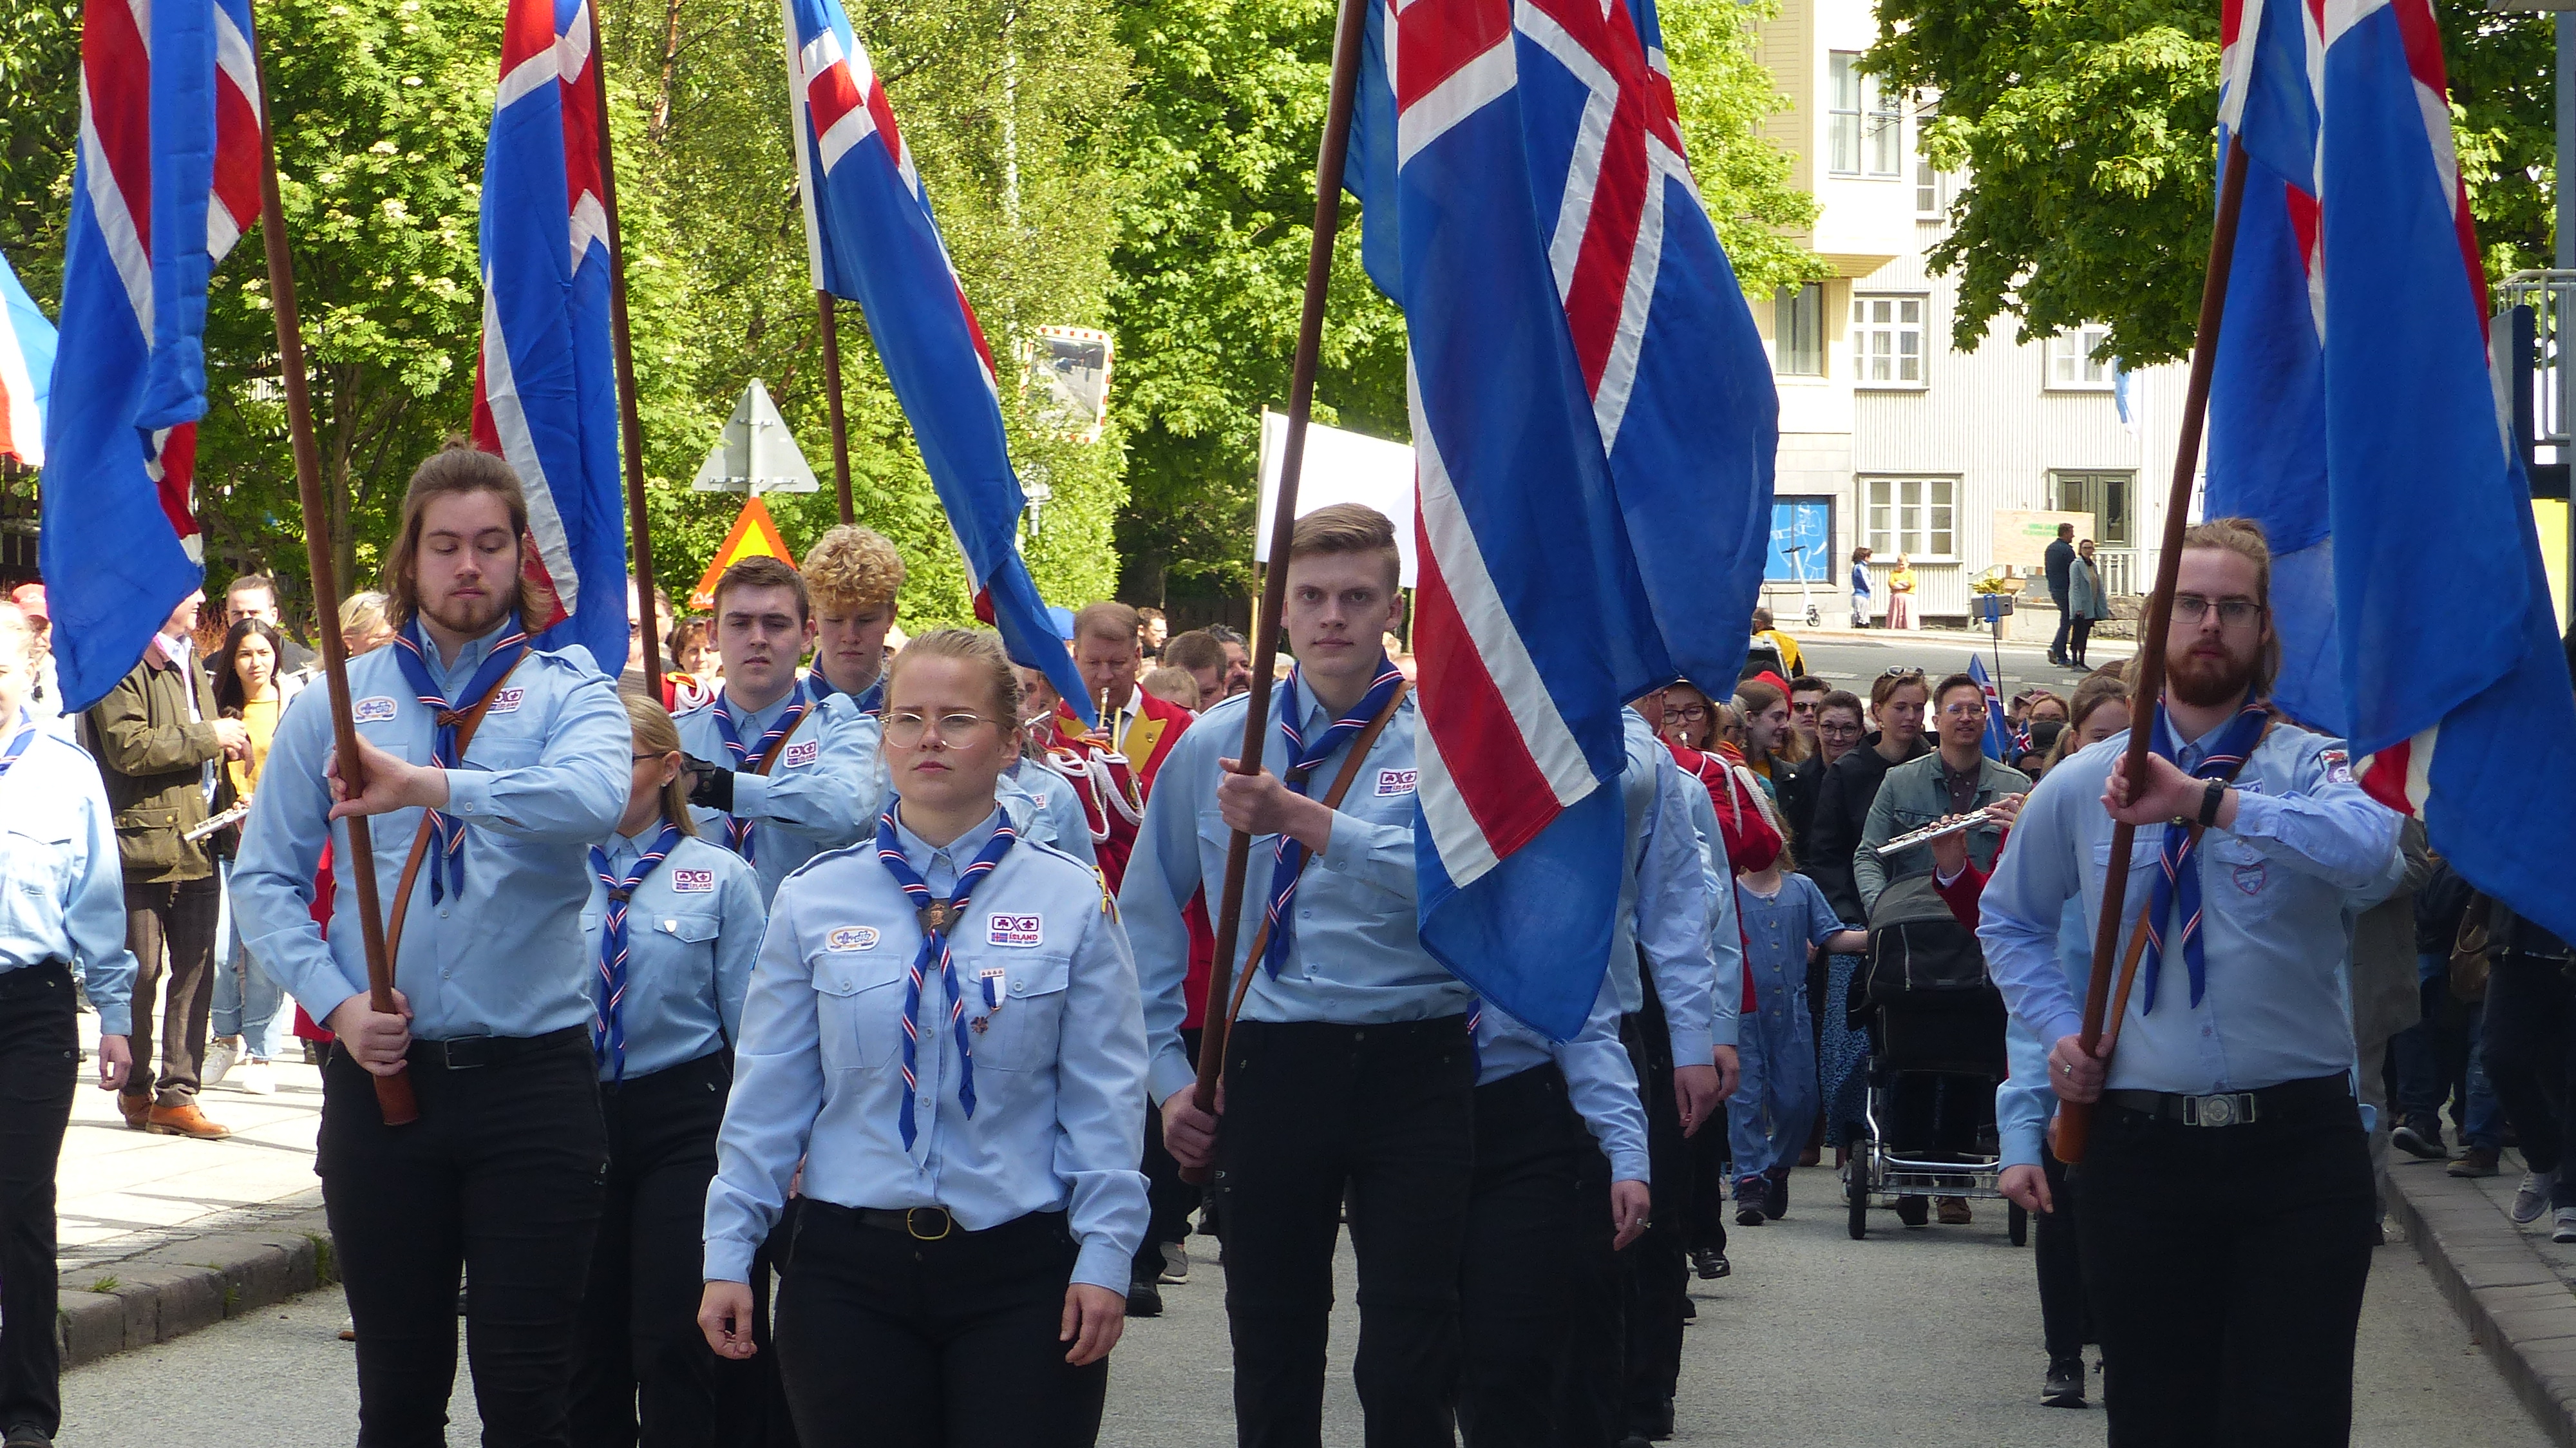 17 June, Iceland National Day